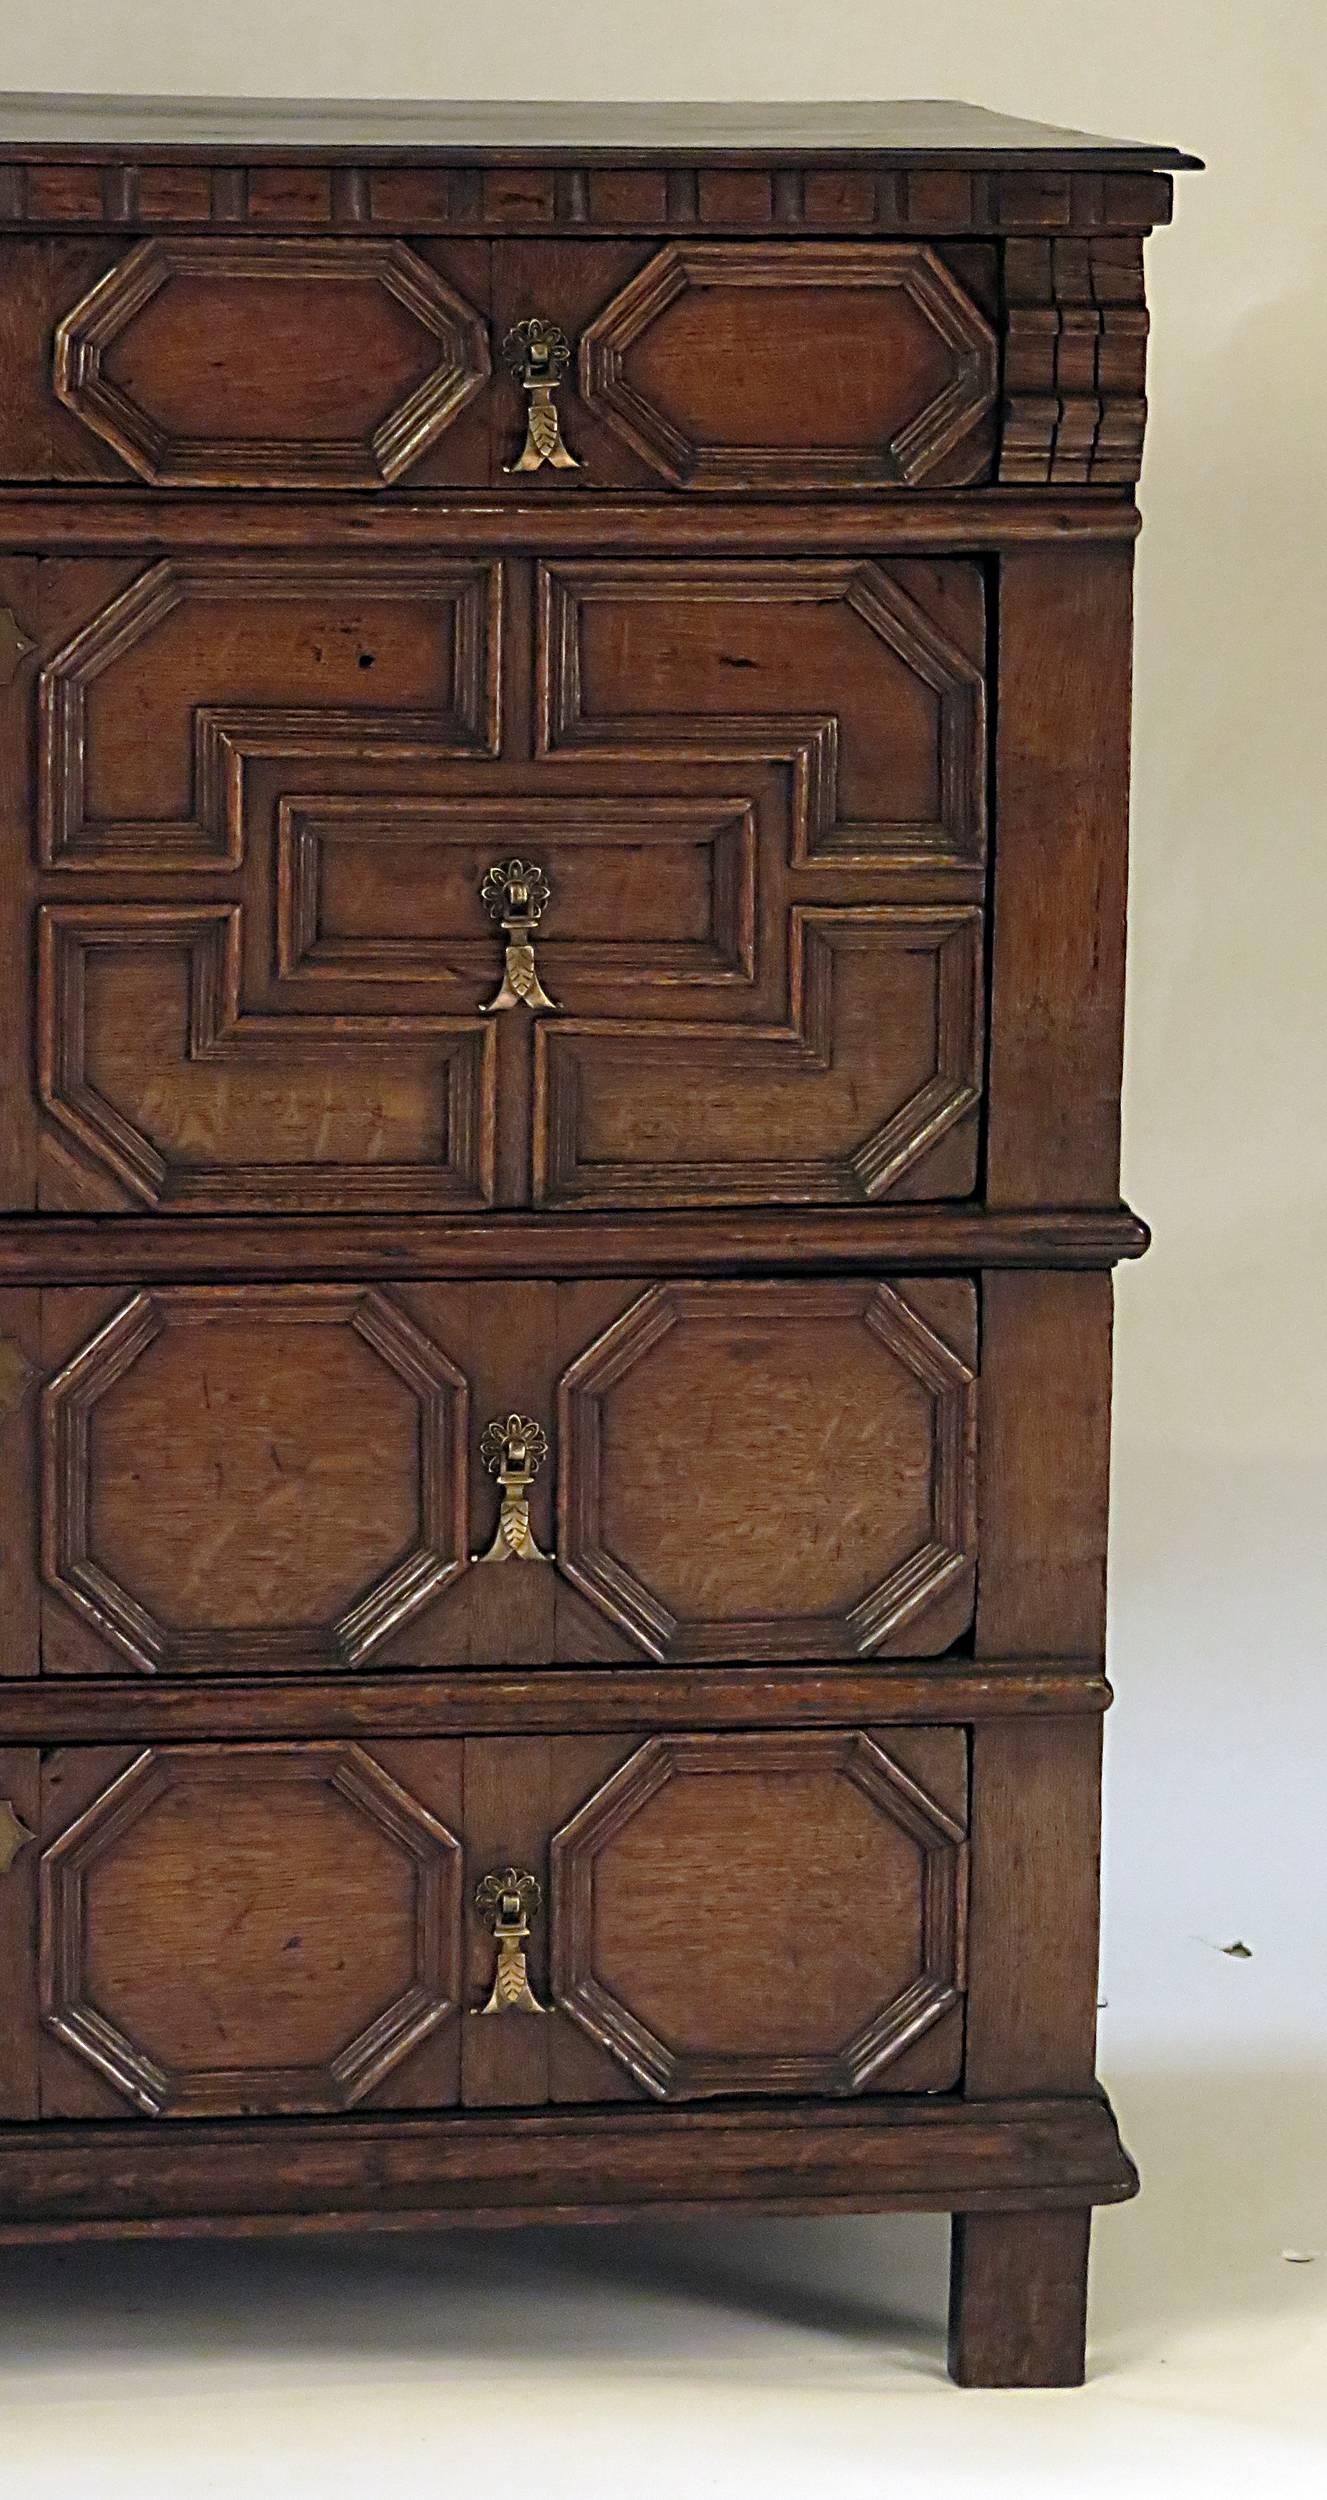 A well proportioned Charles II oak paneled chest with nice color and good overall condition. This is a larger example with well executed paneling. A classic at home in a contemporary or traditional interior. The nice thing about these oak pieces is